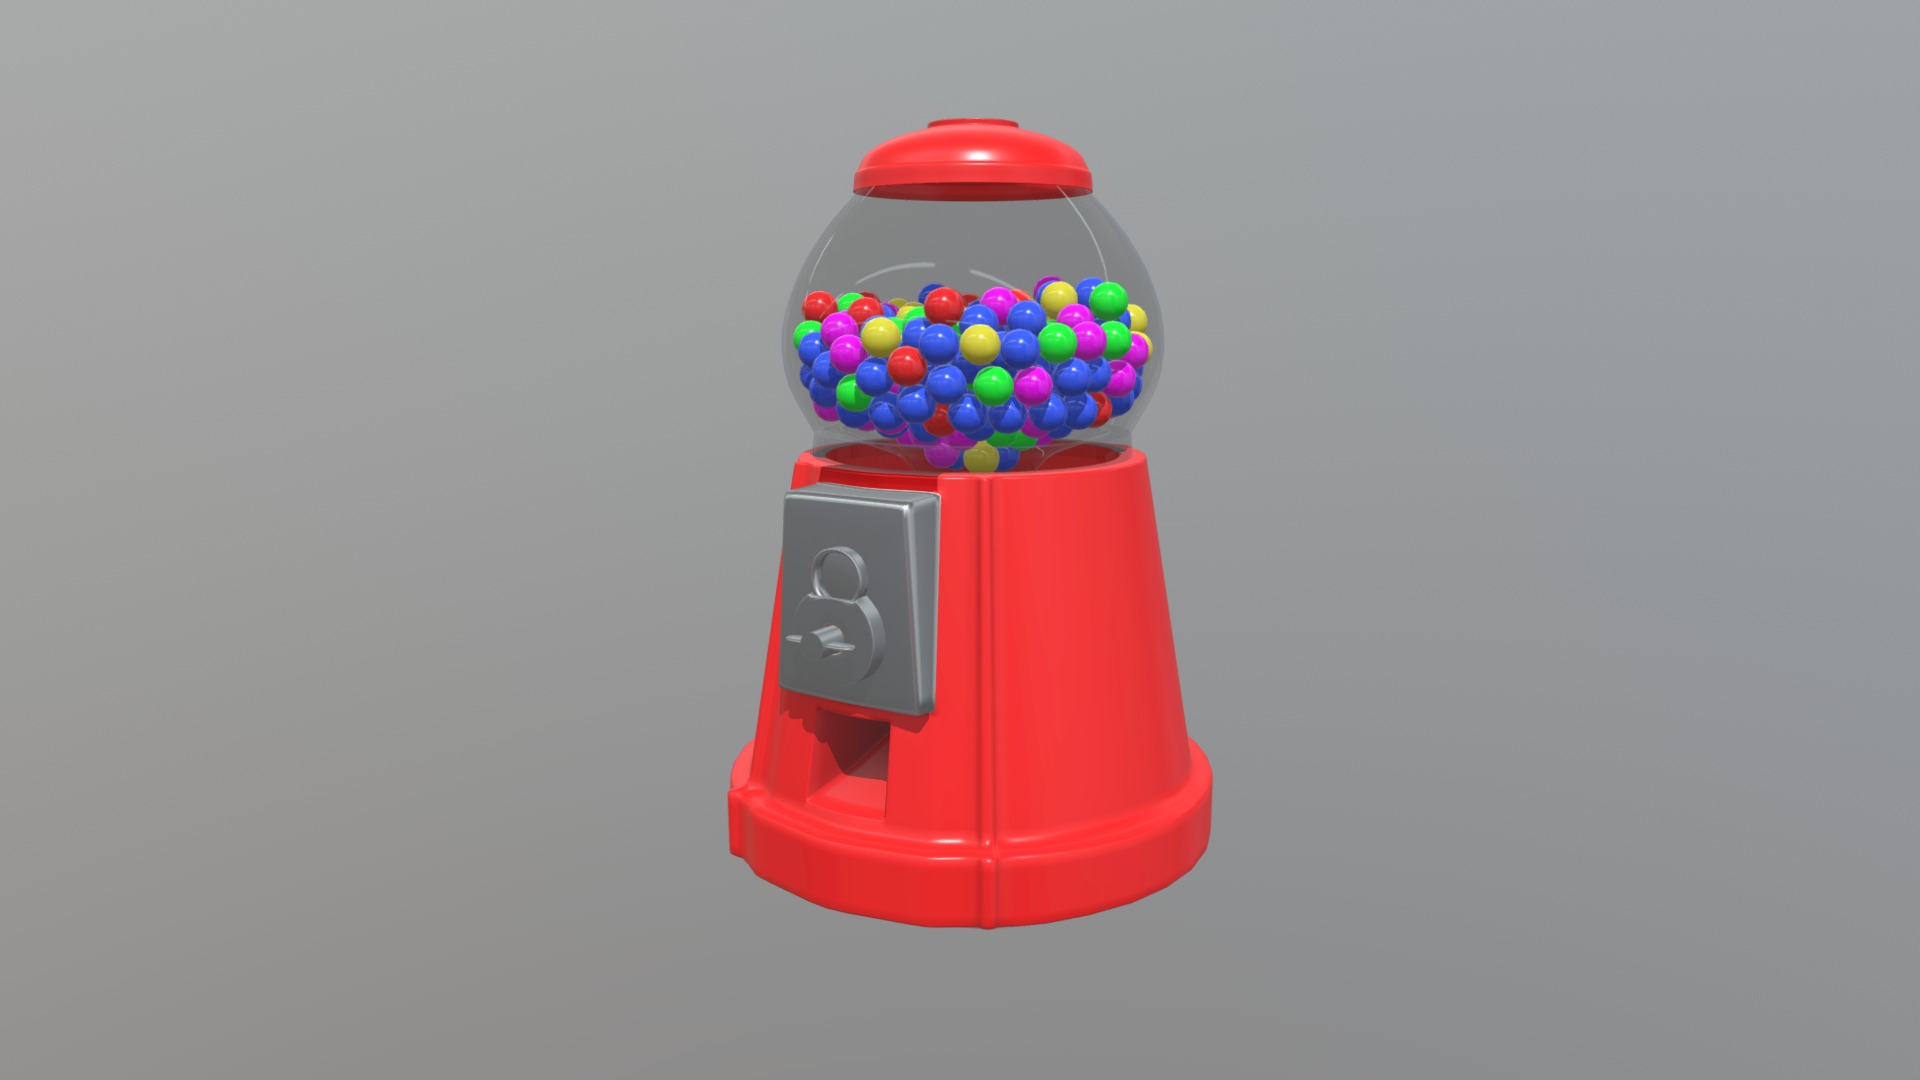 3D model Gumball Machine Filled with Gumballs - This is a 3D model of the Gumball Machine Filled with Gumballs. The 3D model is about a red and white toy.